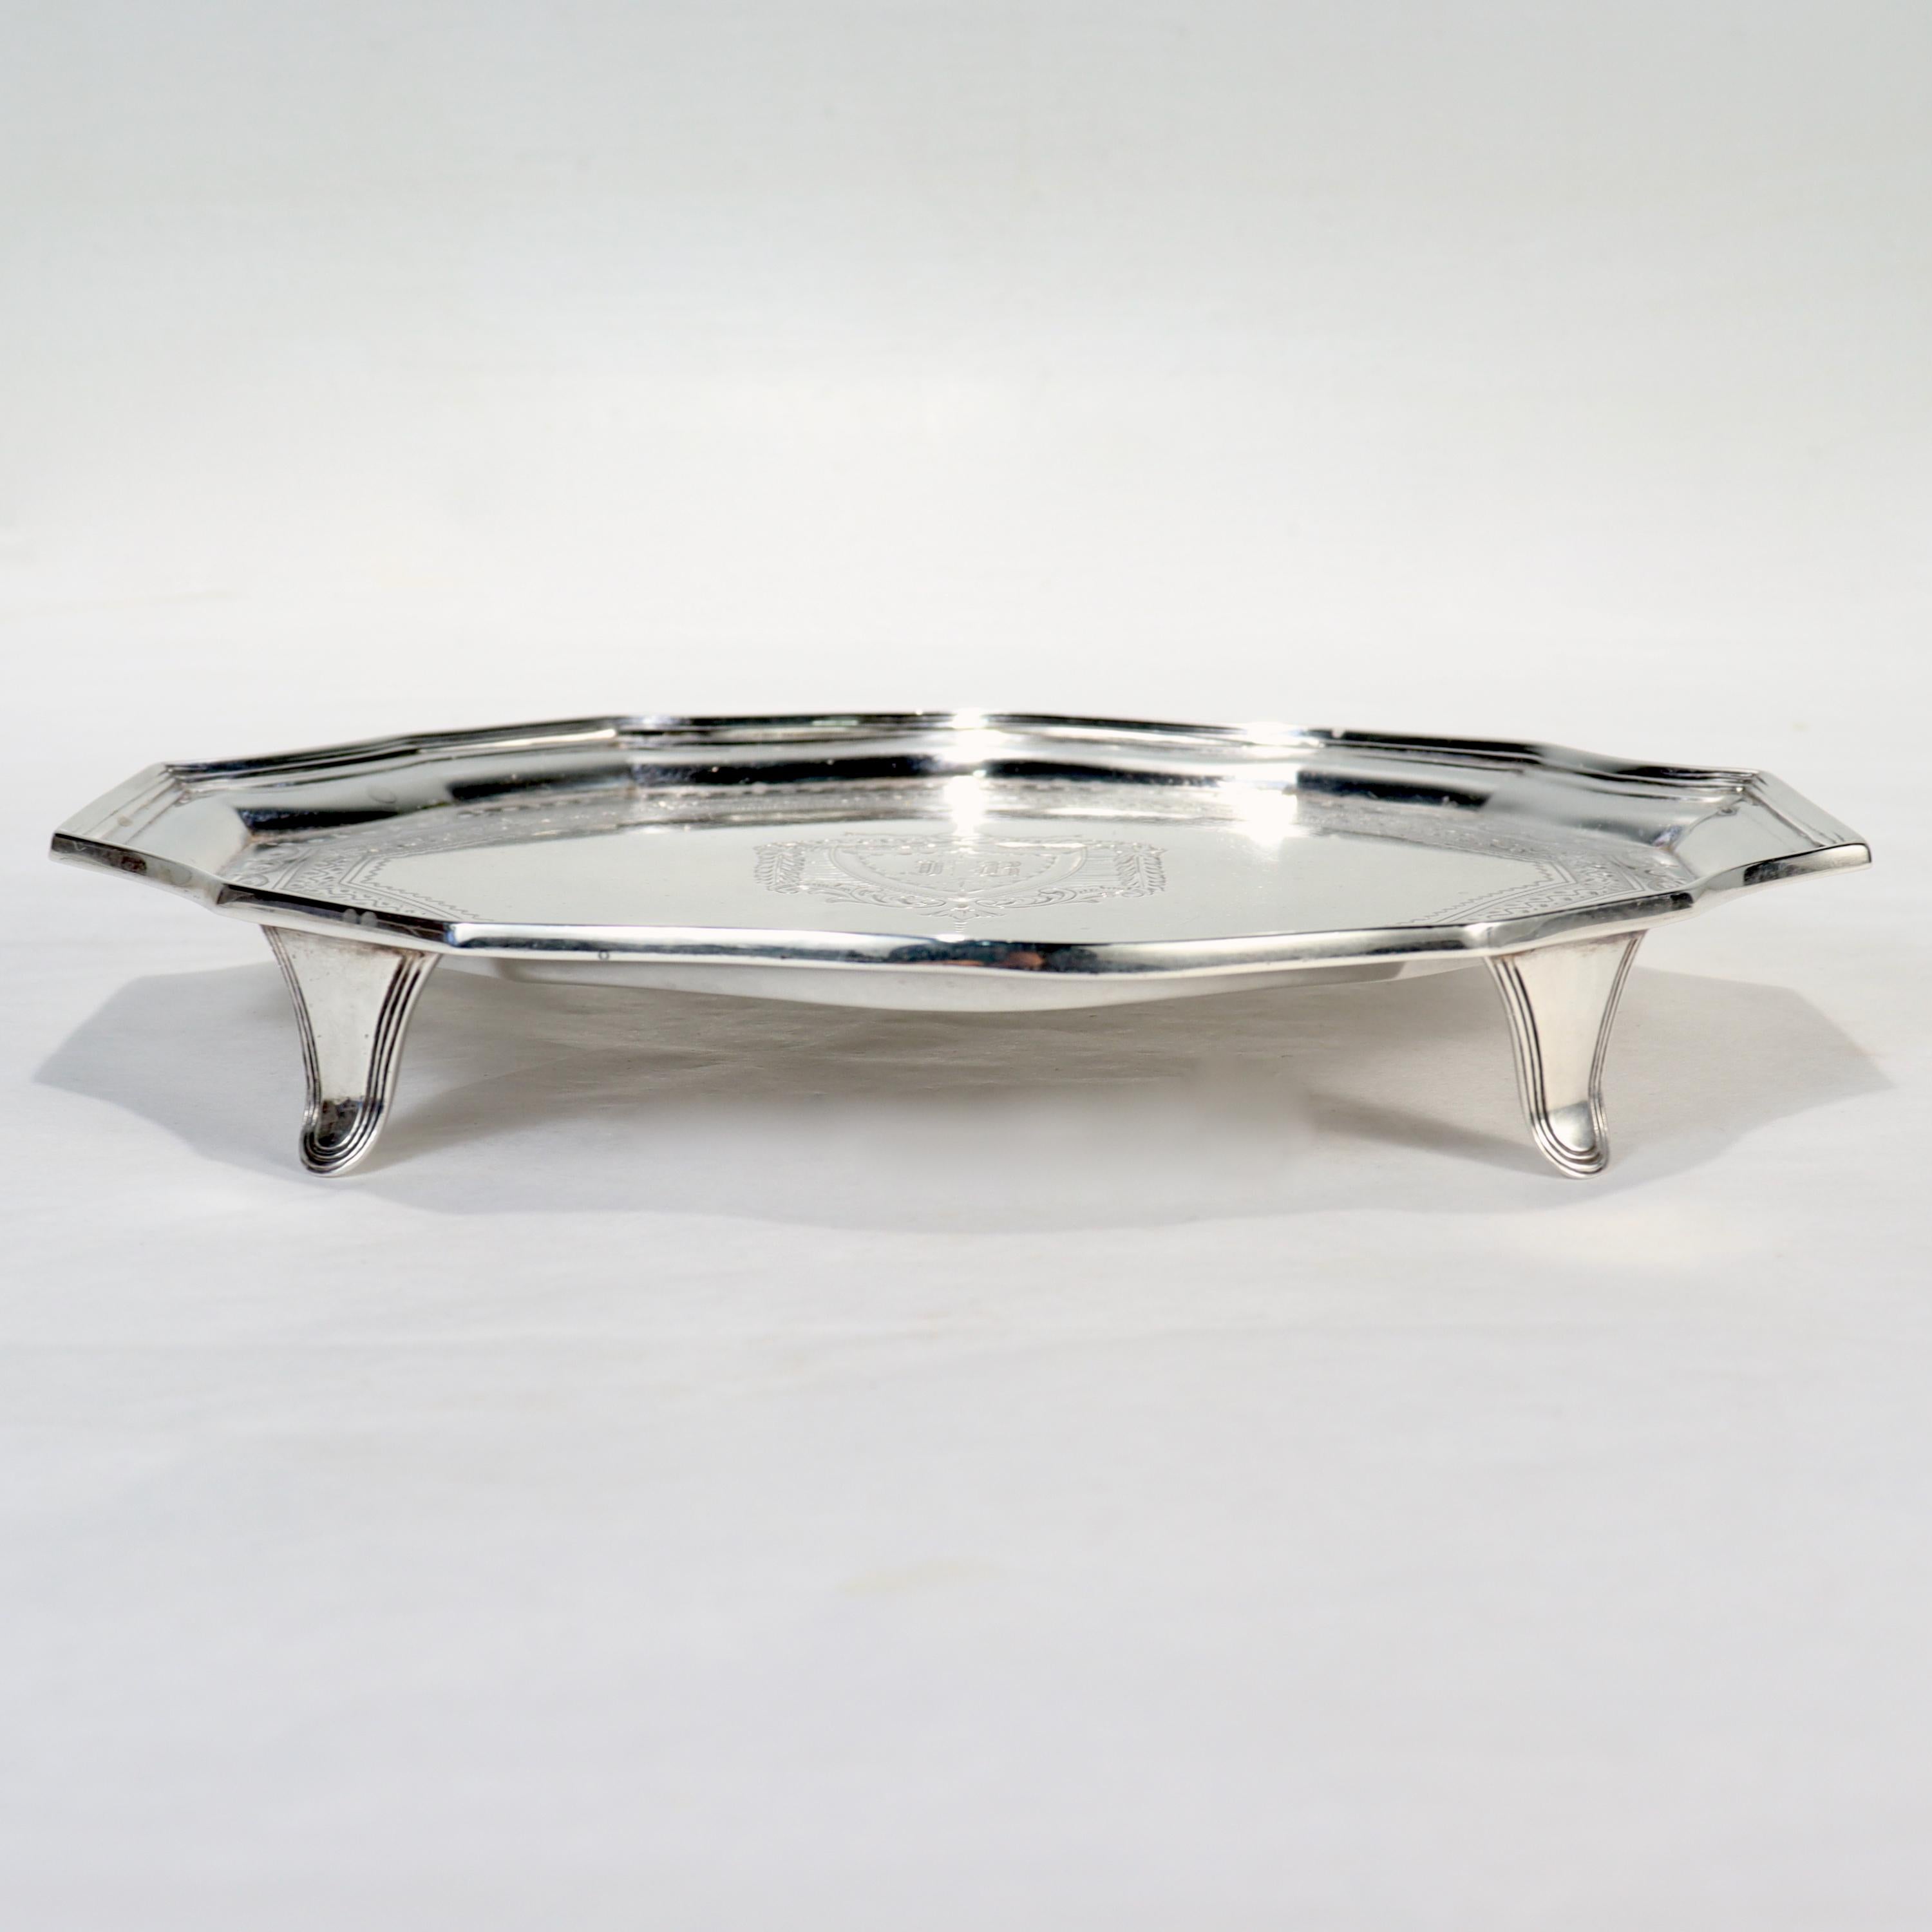 5 uses of silver salver